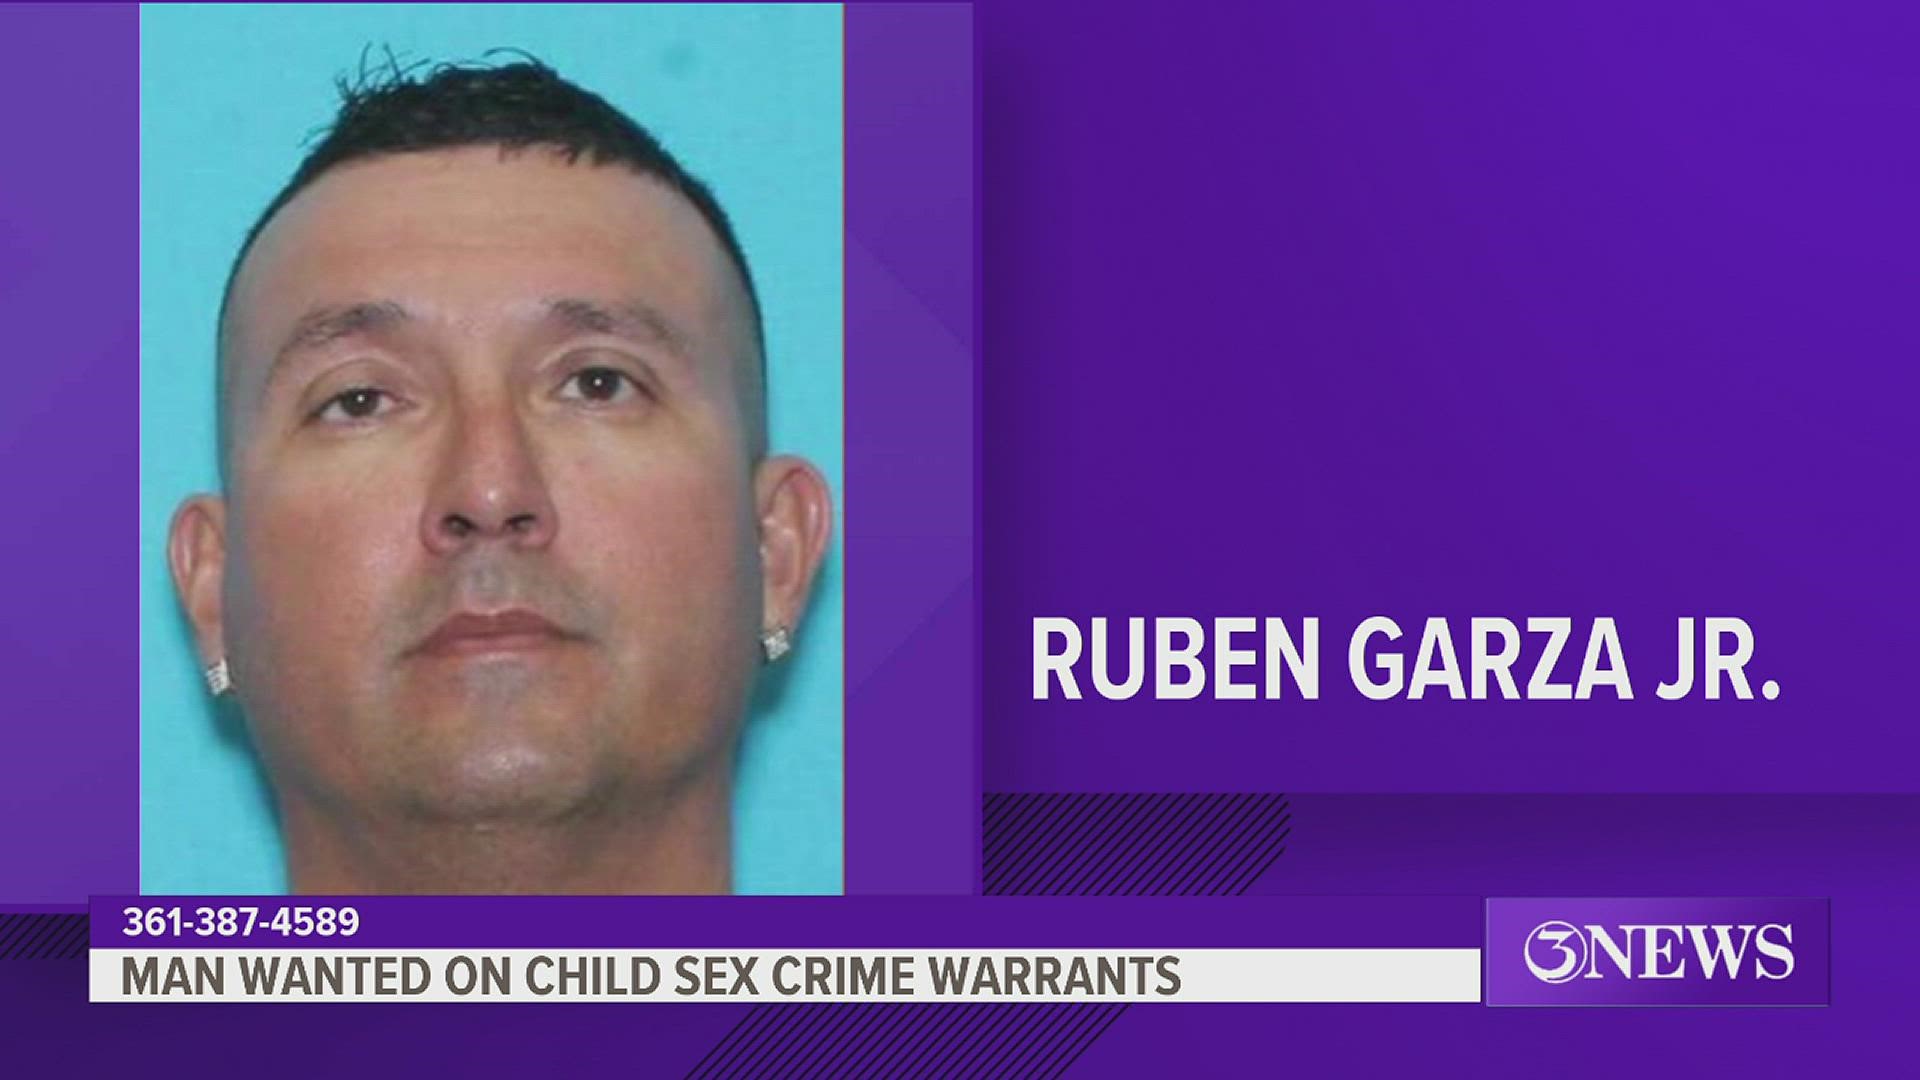 Ruben Garza Jr., 48, has active warrants for continuous sexual abuse of a child and other sex crimes, officials said.